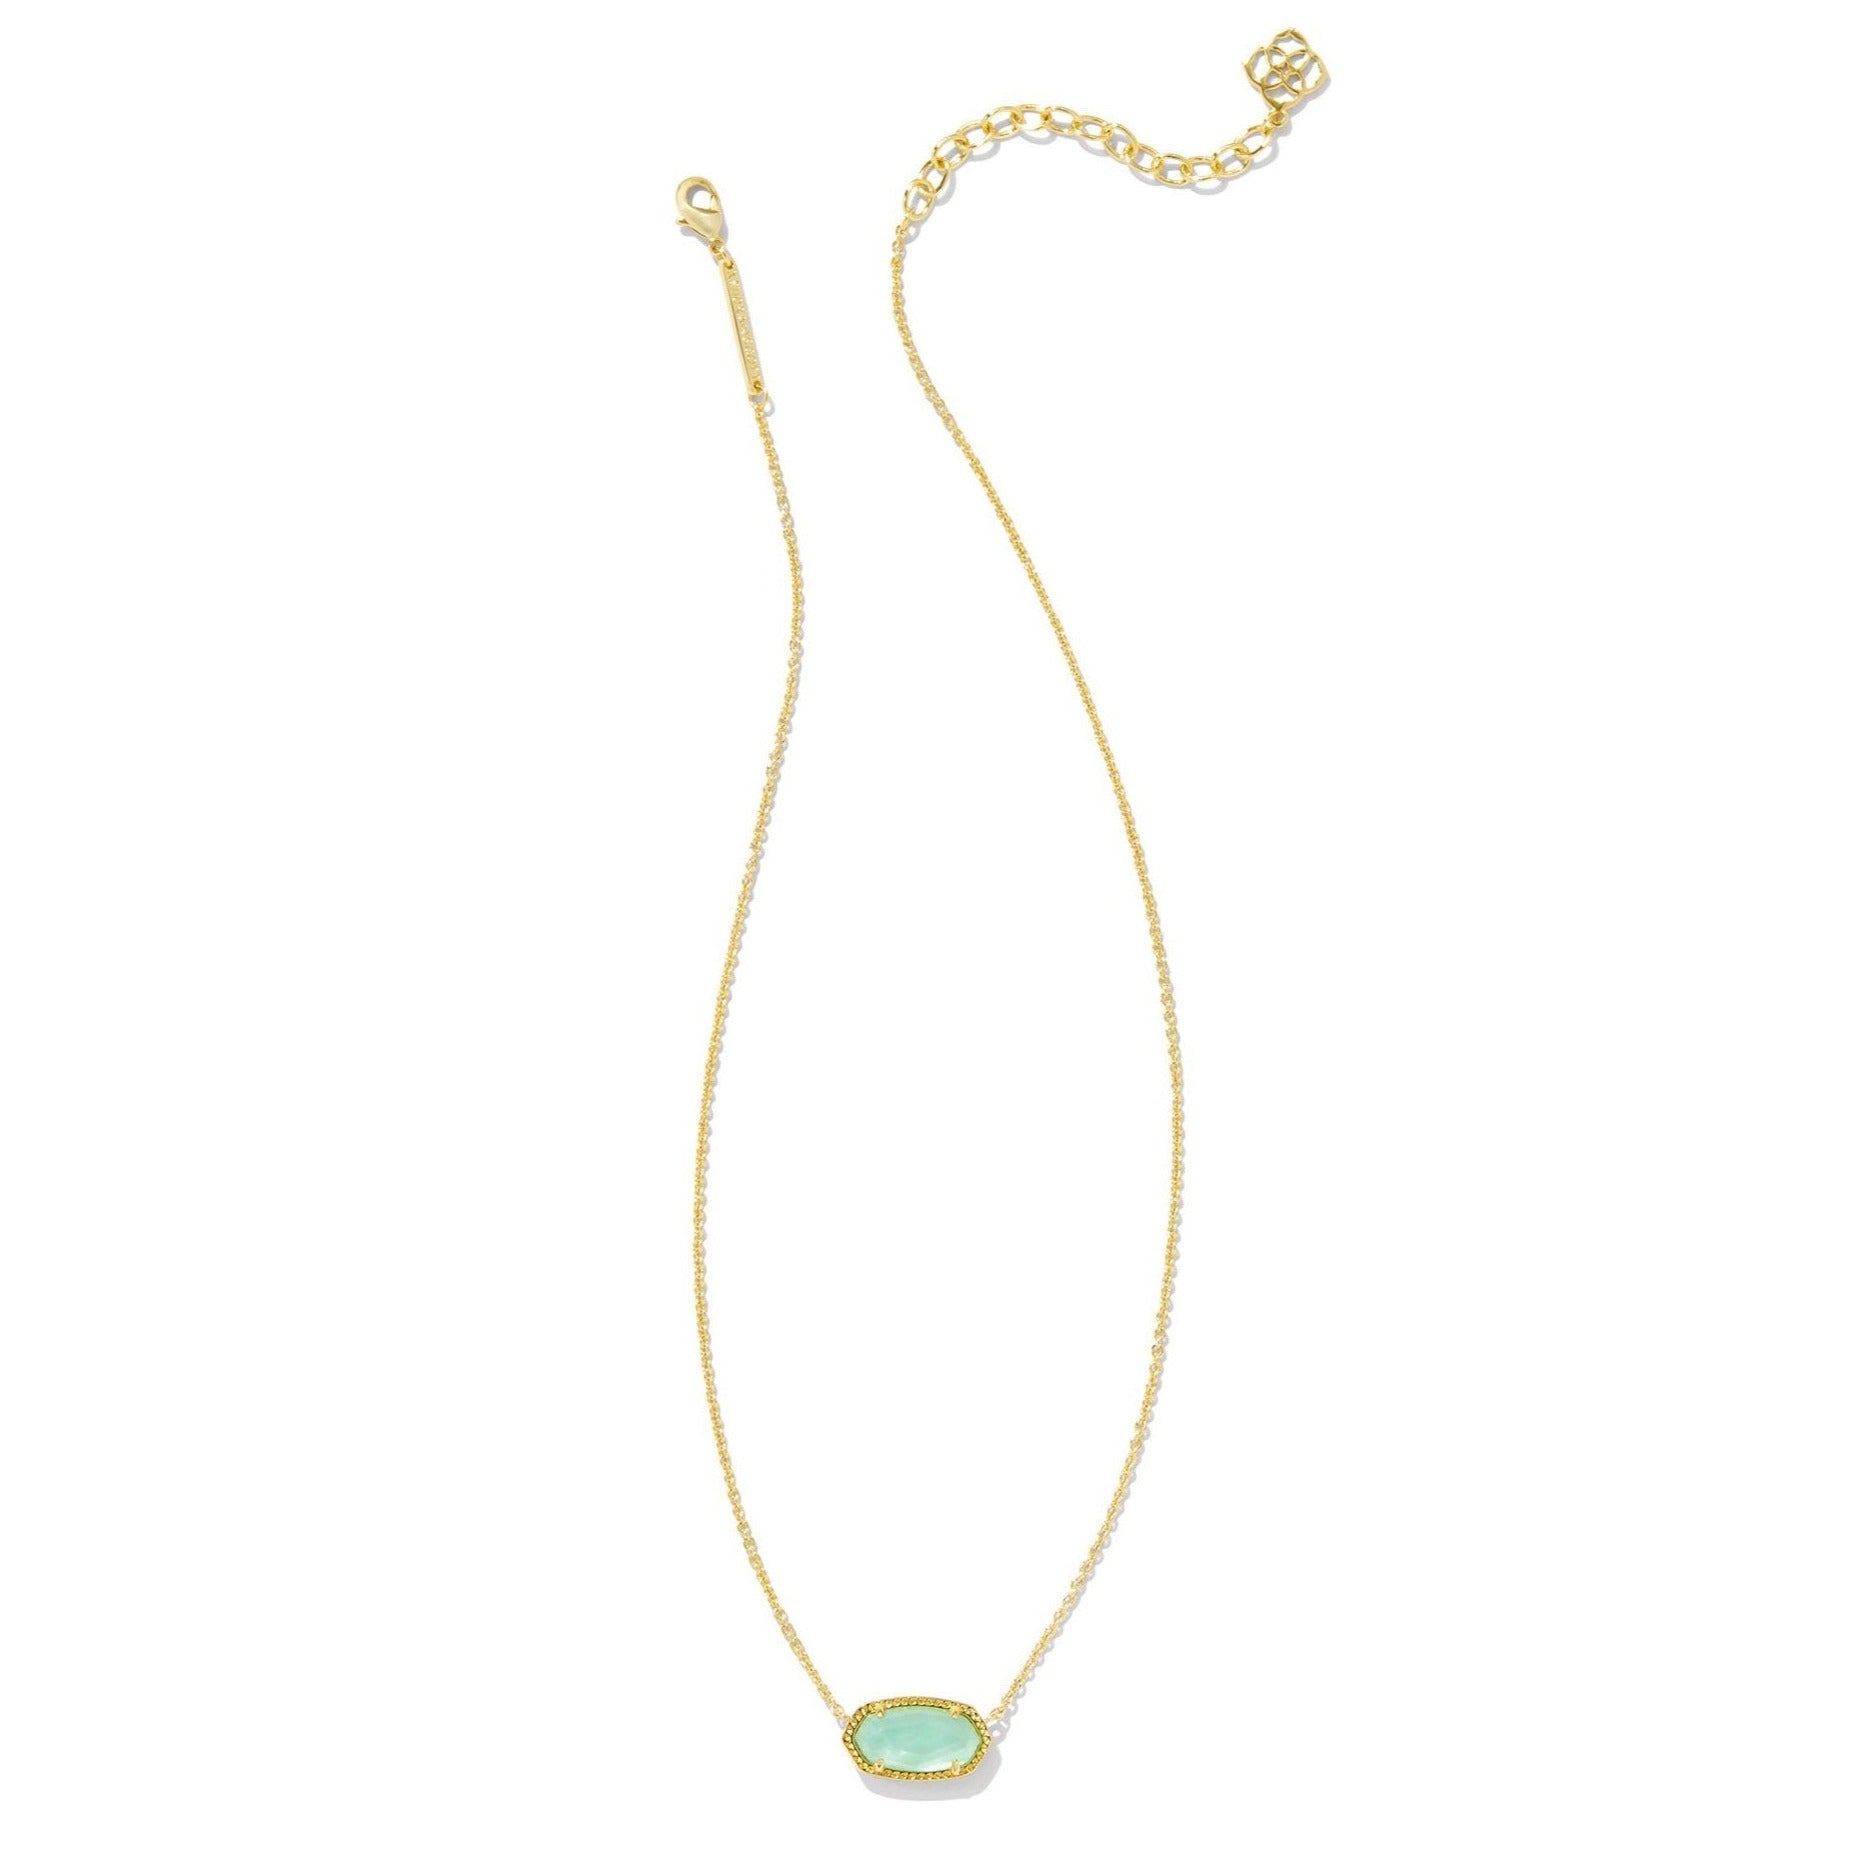 Kendra Scott | Elisa Gold Pendant Necklace in Light Green Mother of Pearl - Giddy Up Glamour Boutique